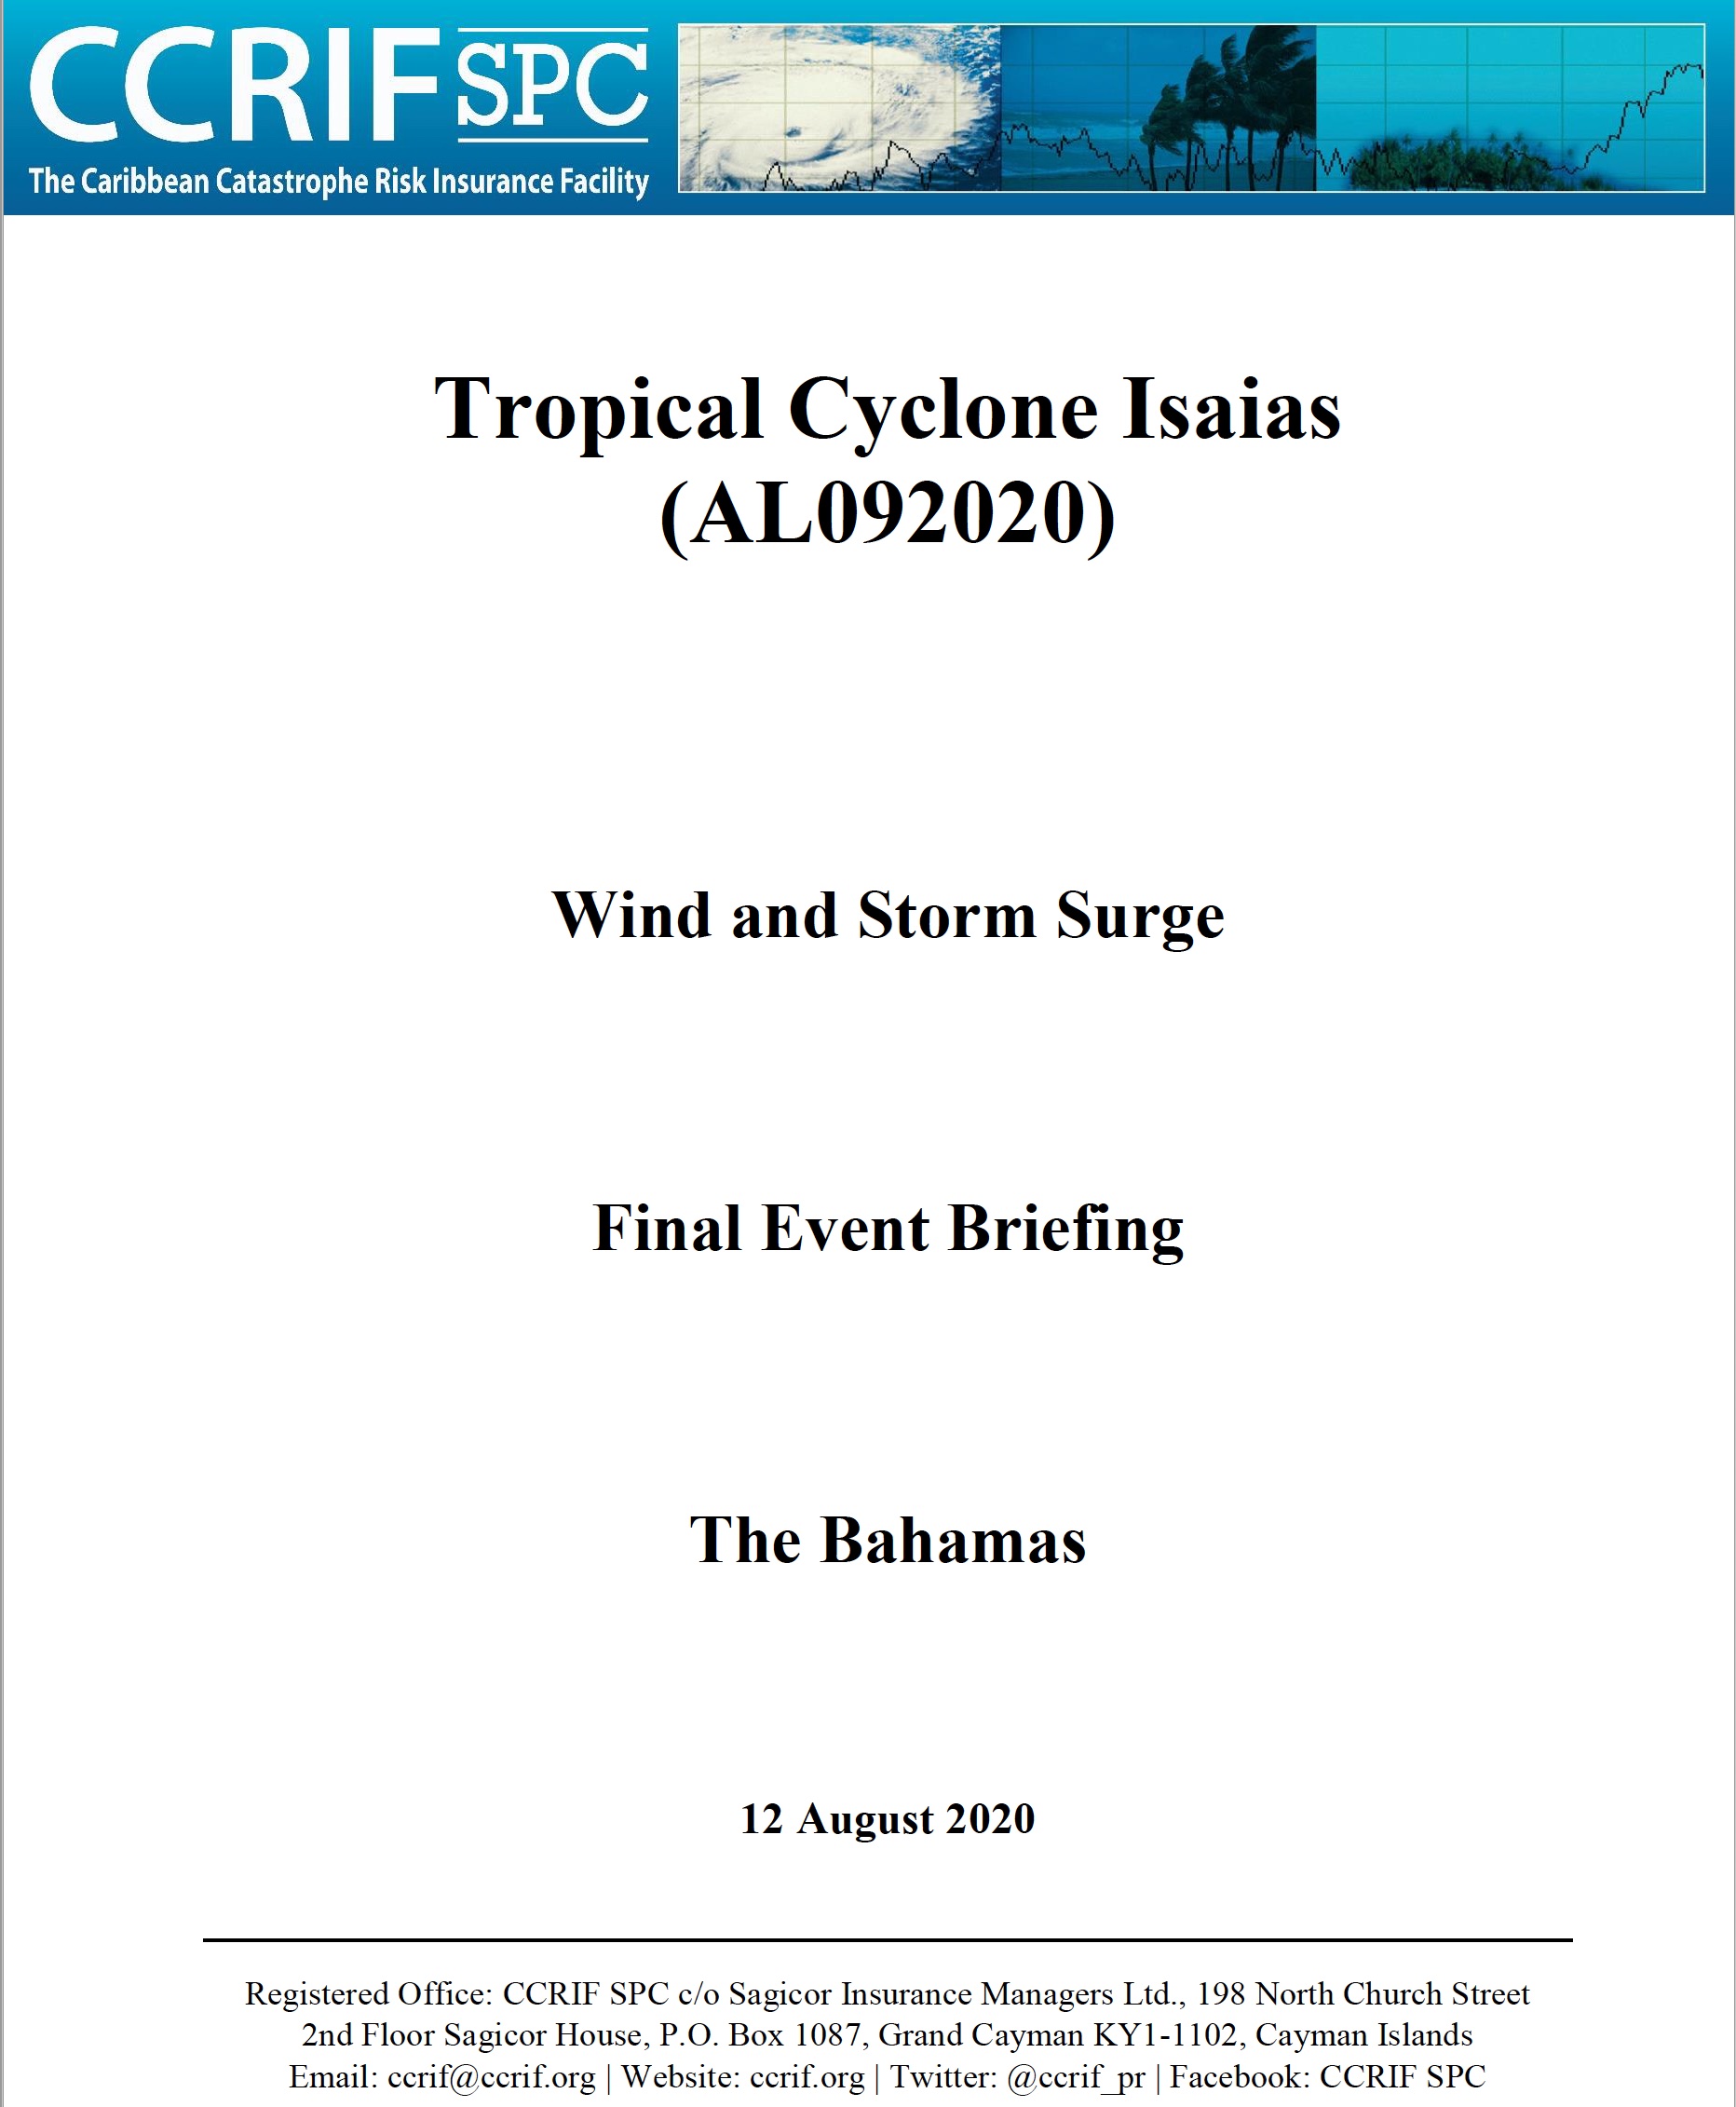 Final Event Briefing - Wind and Storm Surge - The Bahamas - August 12 2020